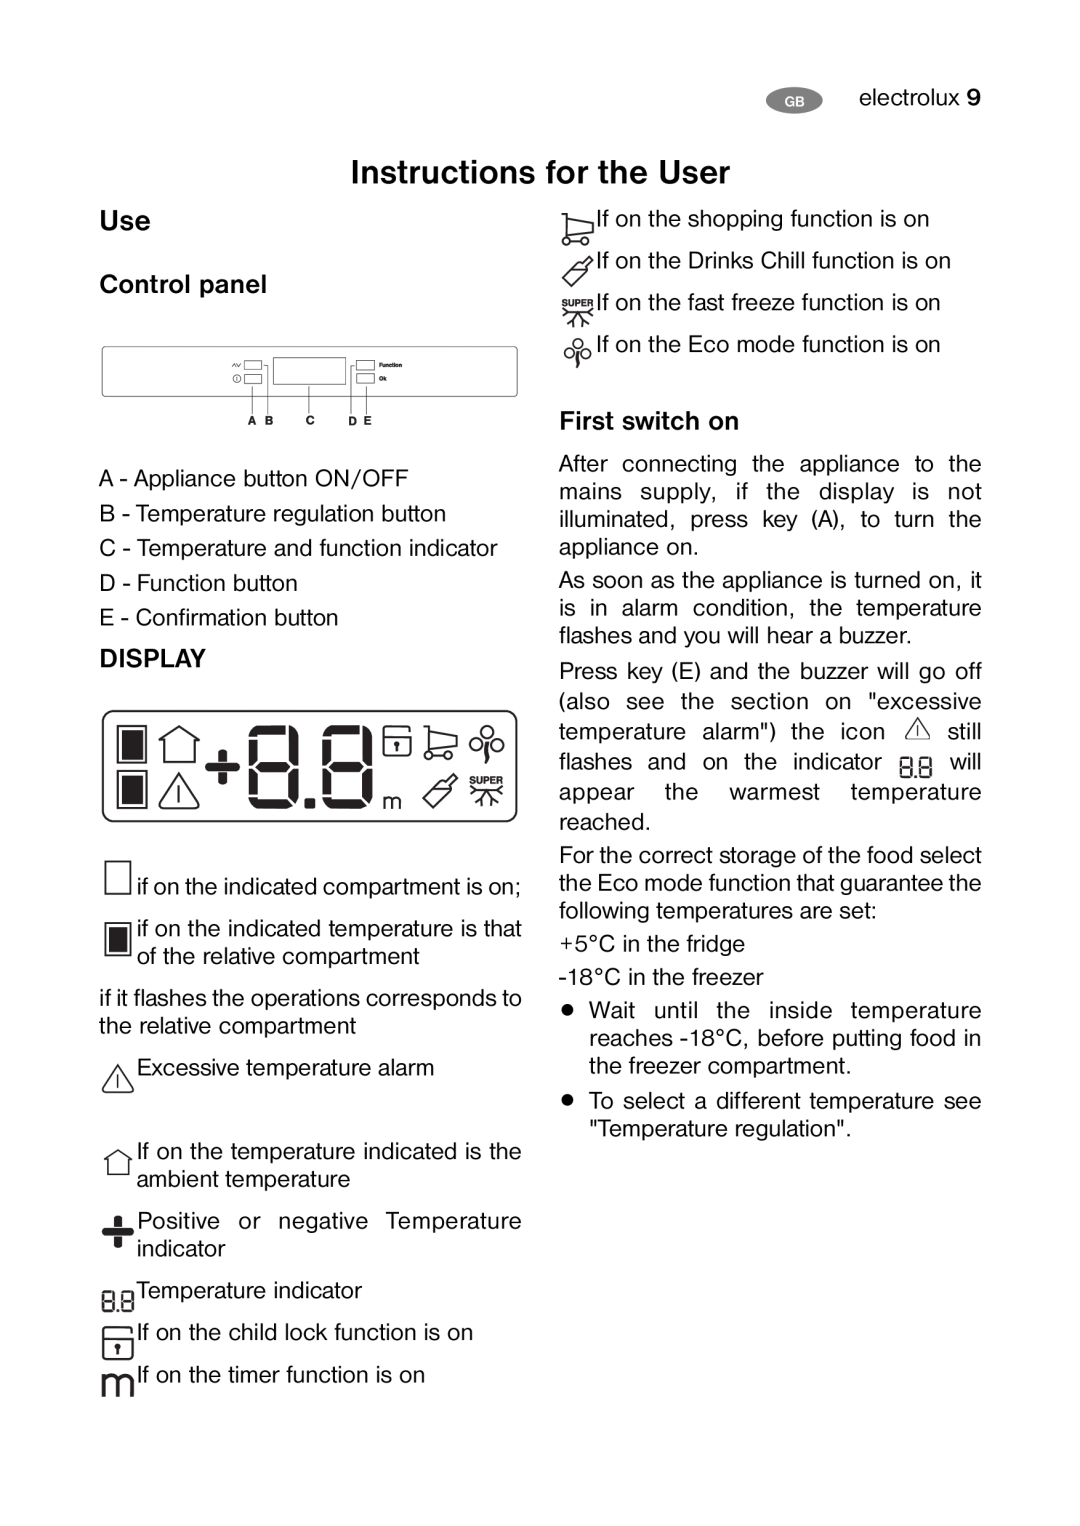 Electrolux ENB 39405 W, ENB 40405 S, ENB 35405 W Instructions for the User, Control panel, Display, First switch on 